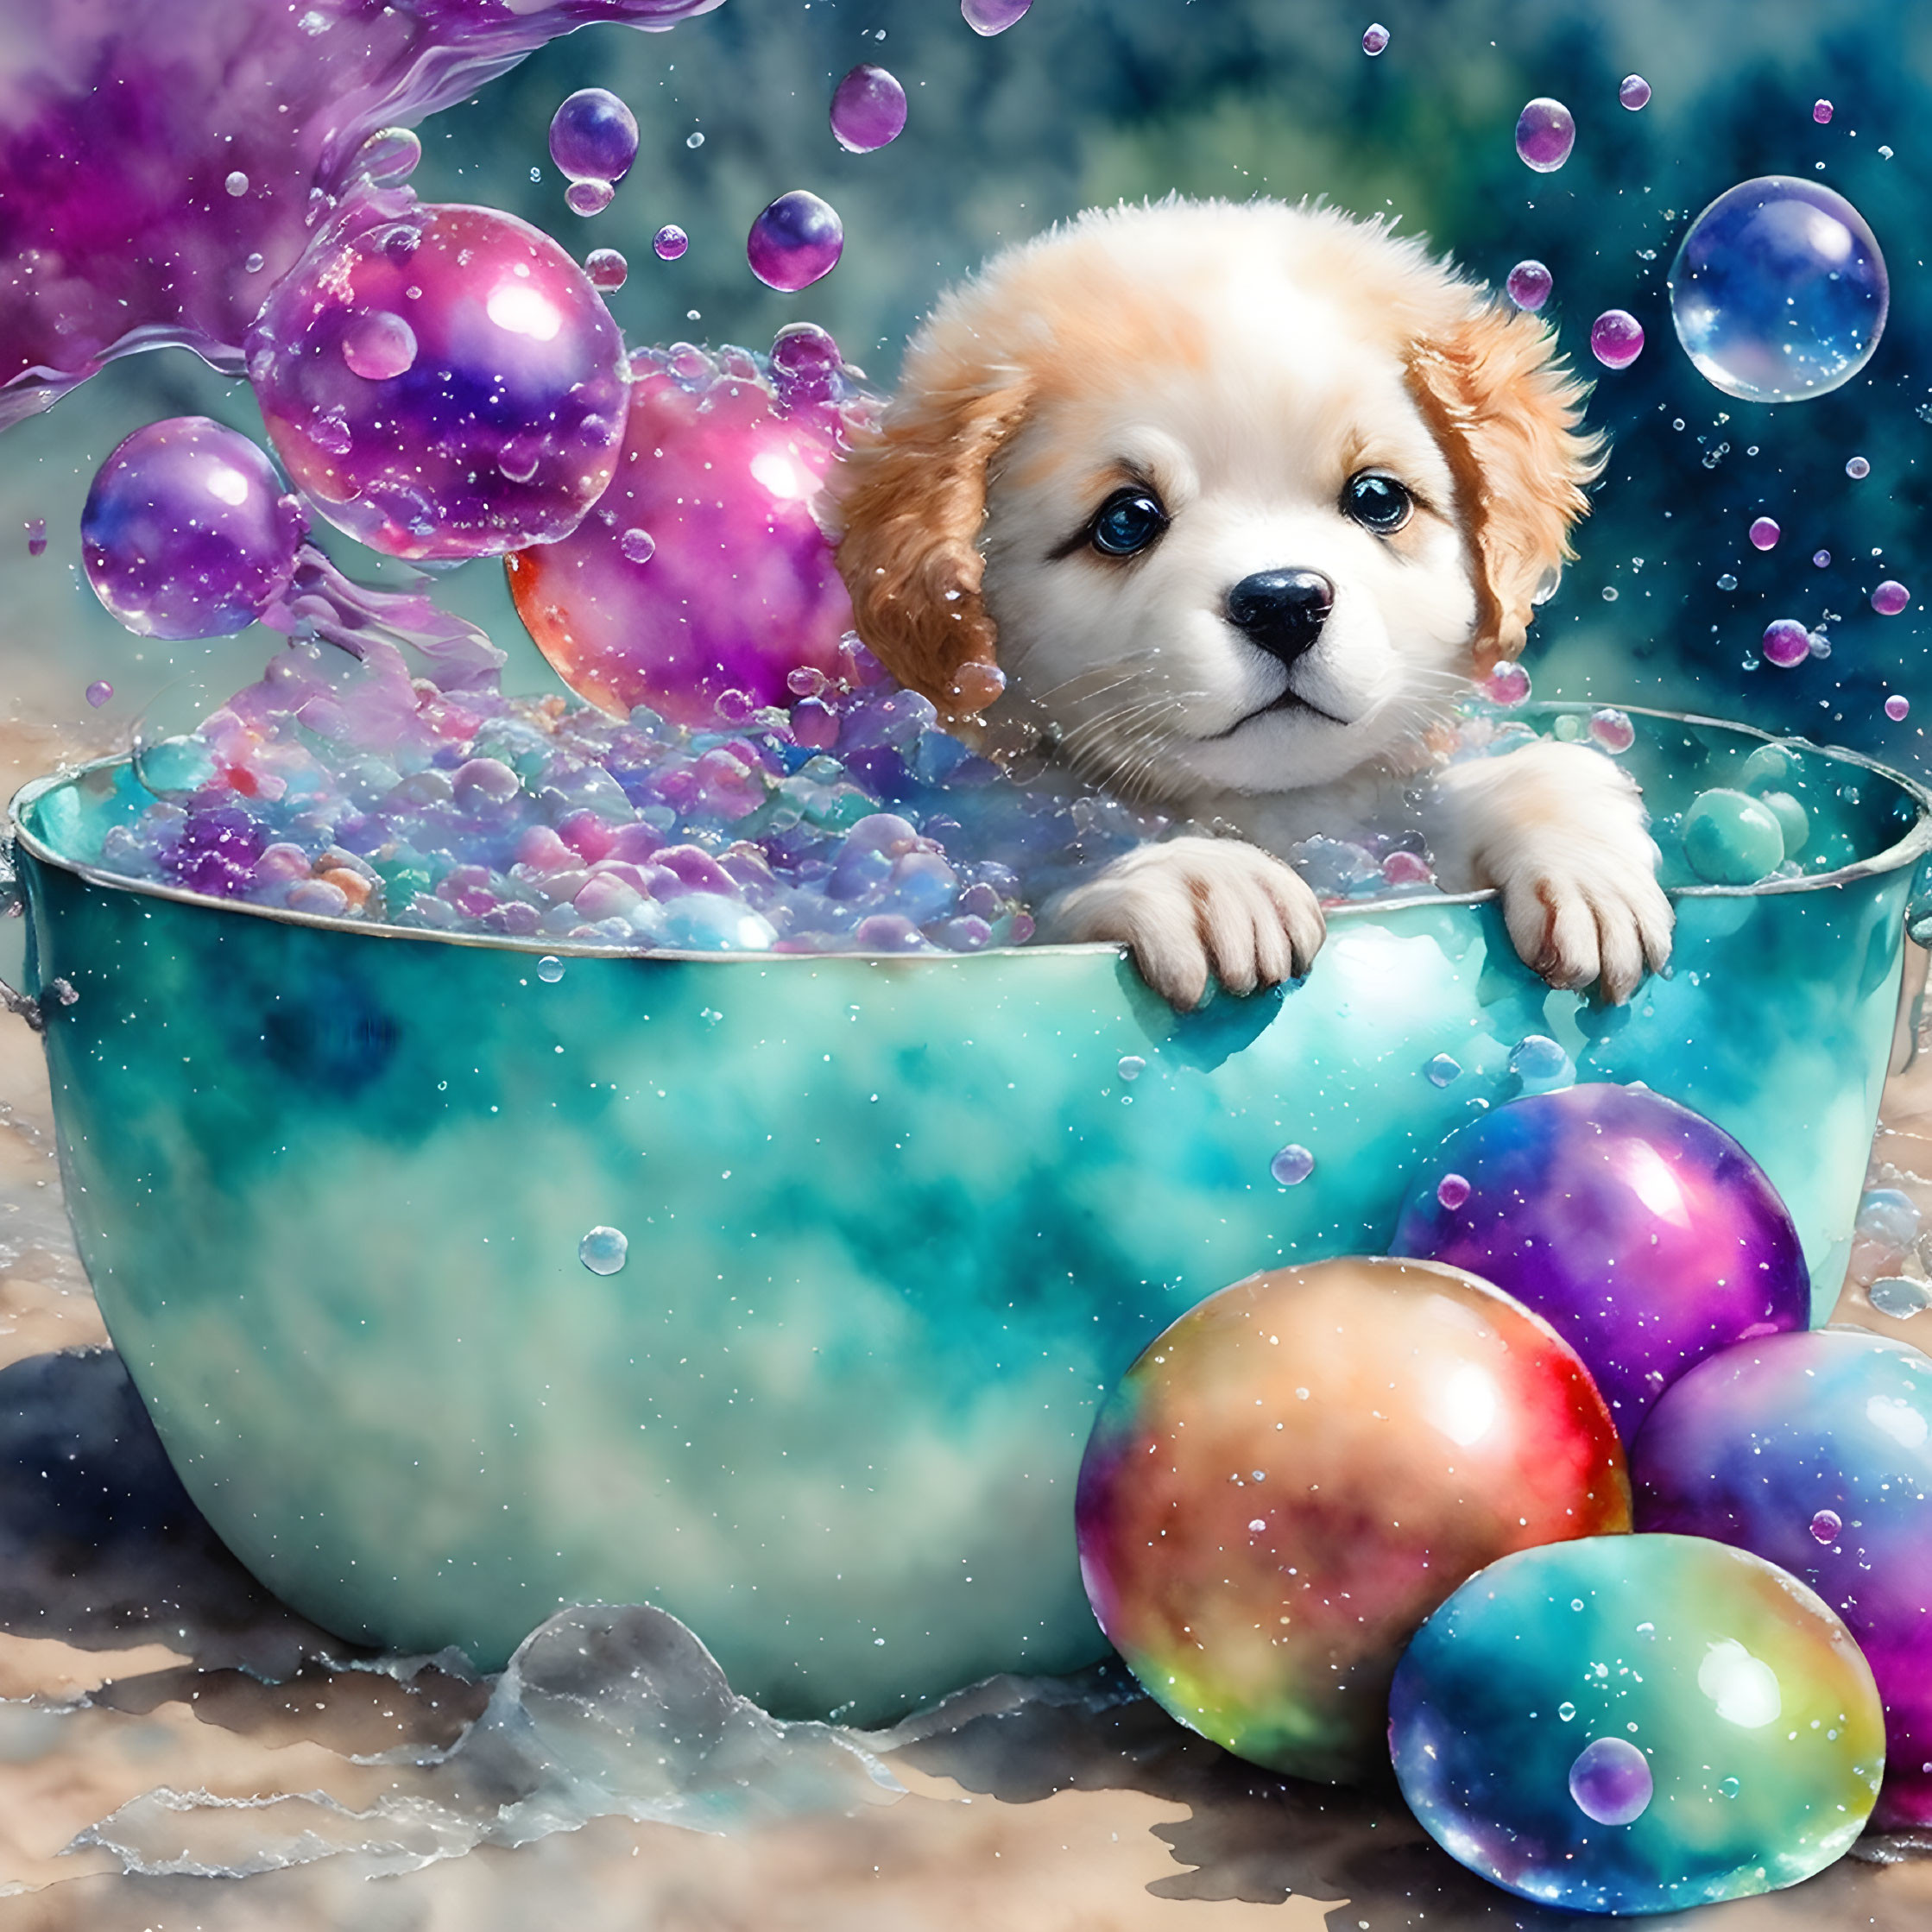 Adorable puppy in blue water basin with colorful bubbles